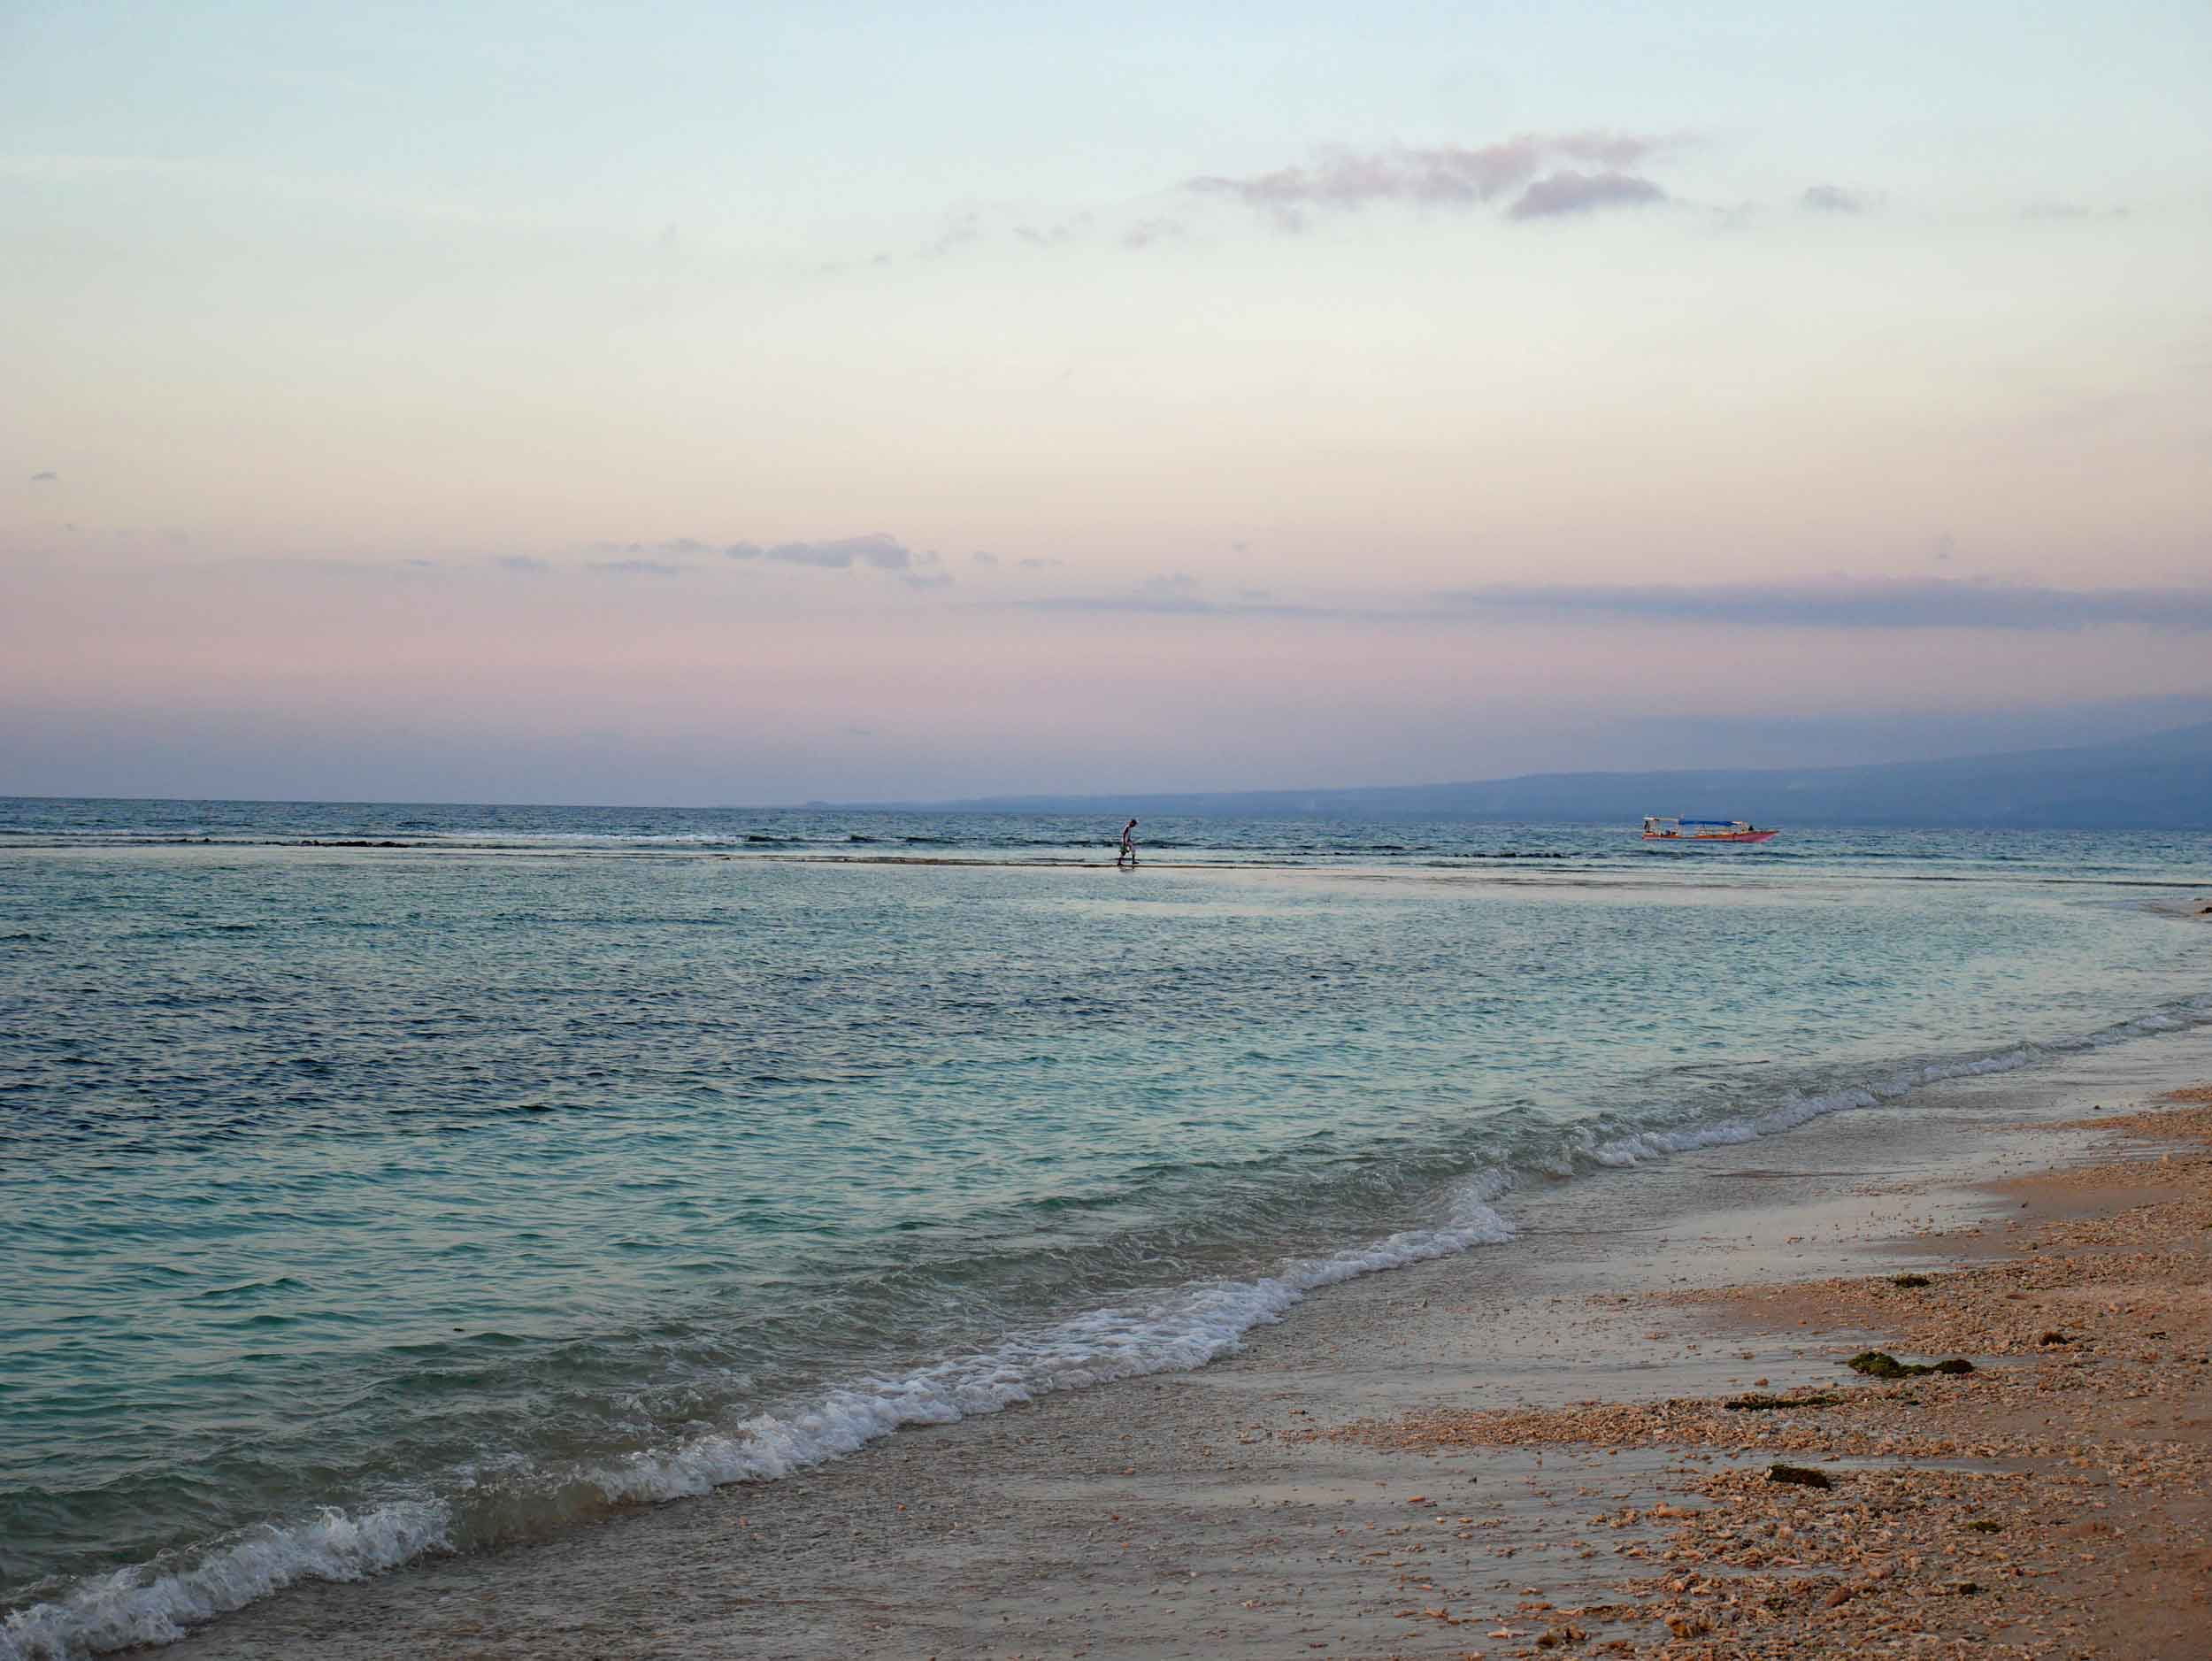  Sunset from the Gili Air coast, where a fisherman was taking advantage of the low tide to seemingly walk on water. 